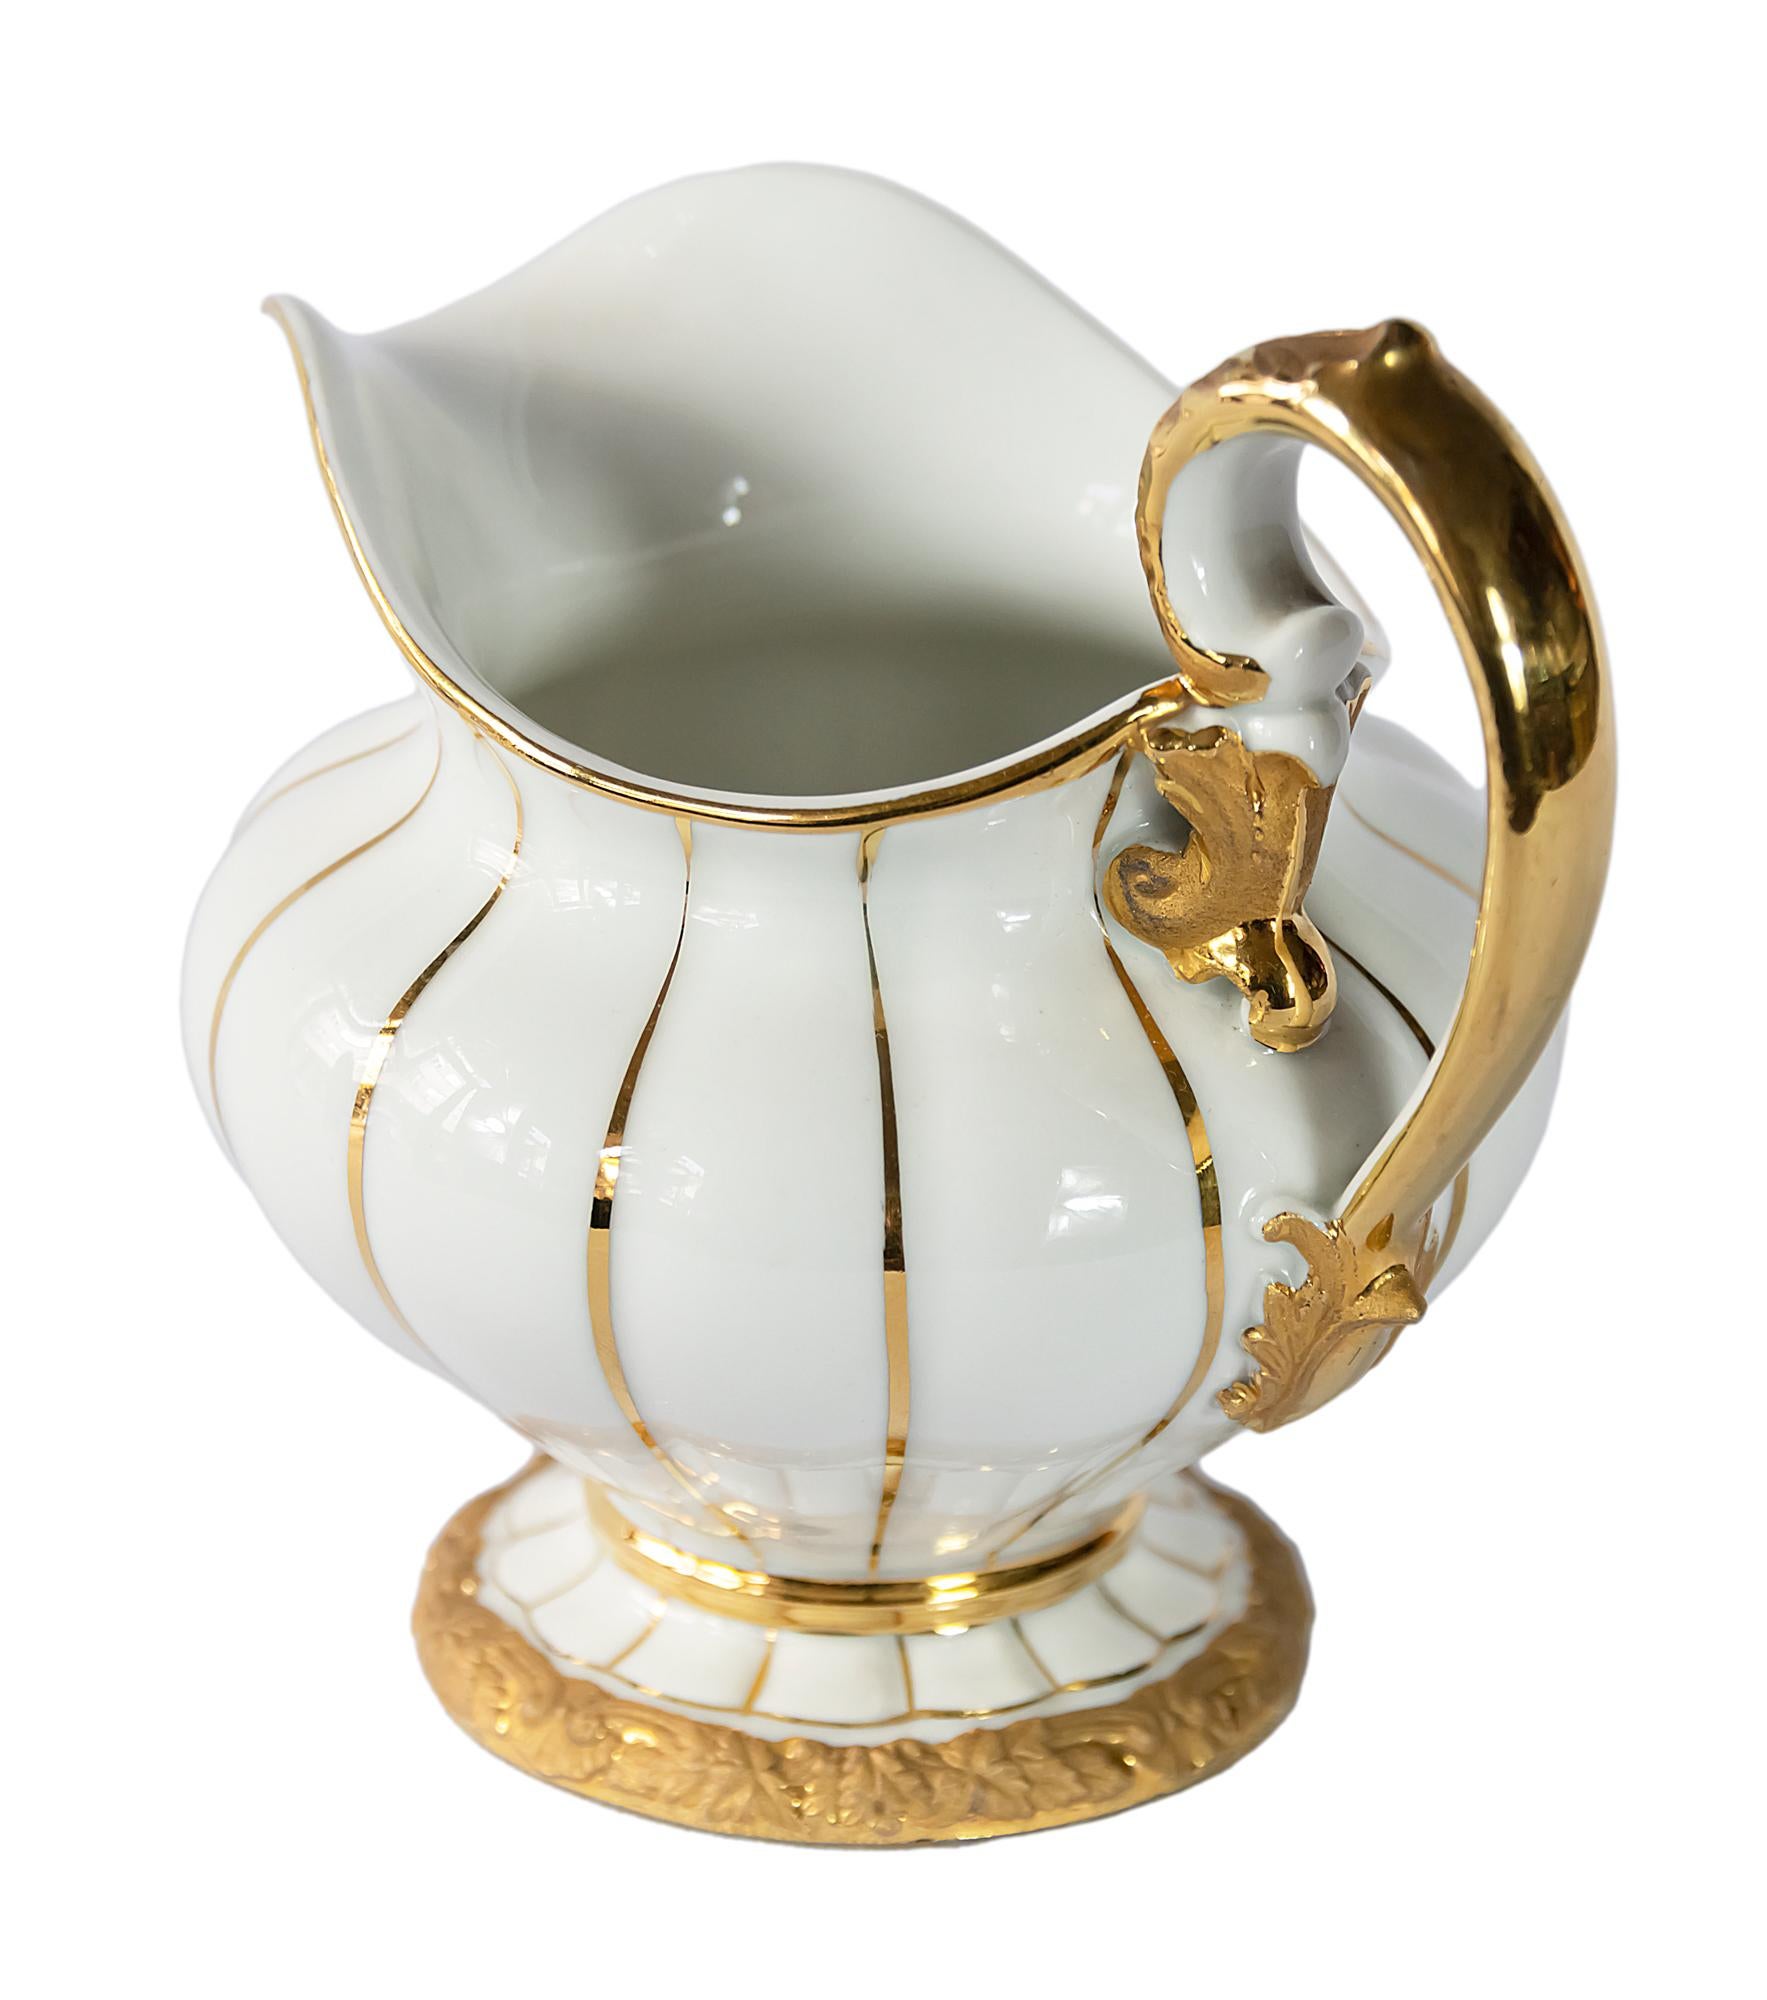 German Meissen porcelain milk pitcher / jug.
Porcelain is hand painted with gold.
The logo marked on the bottom.